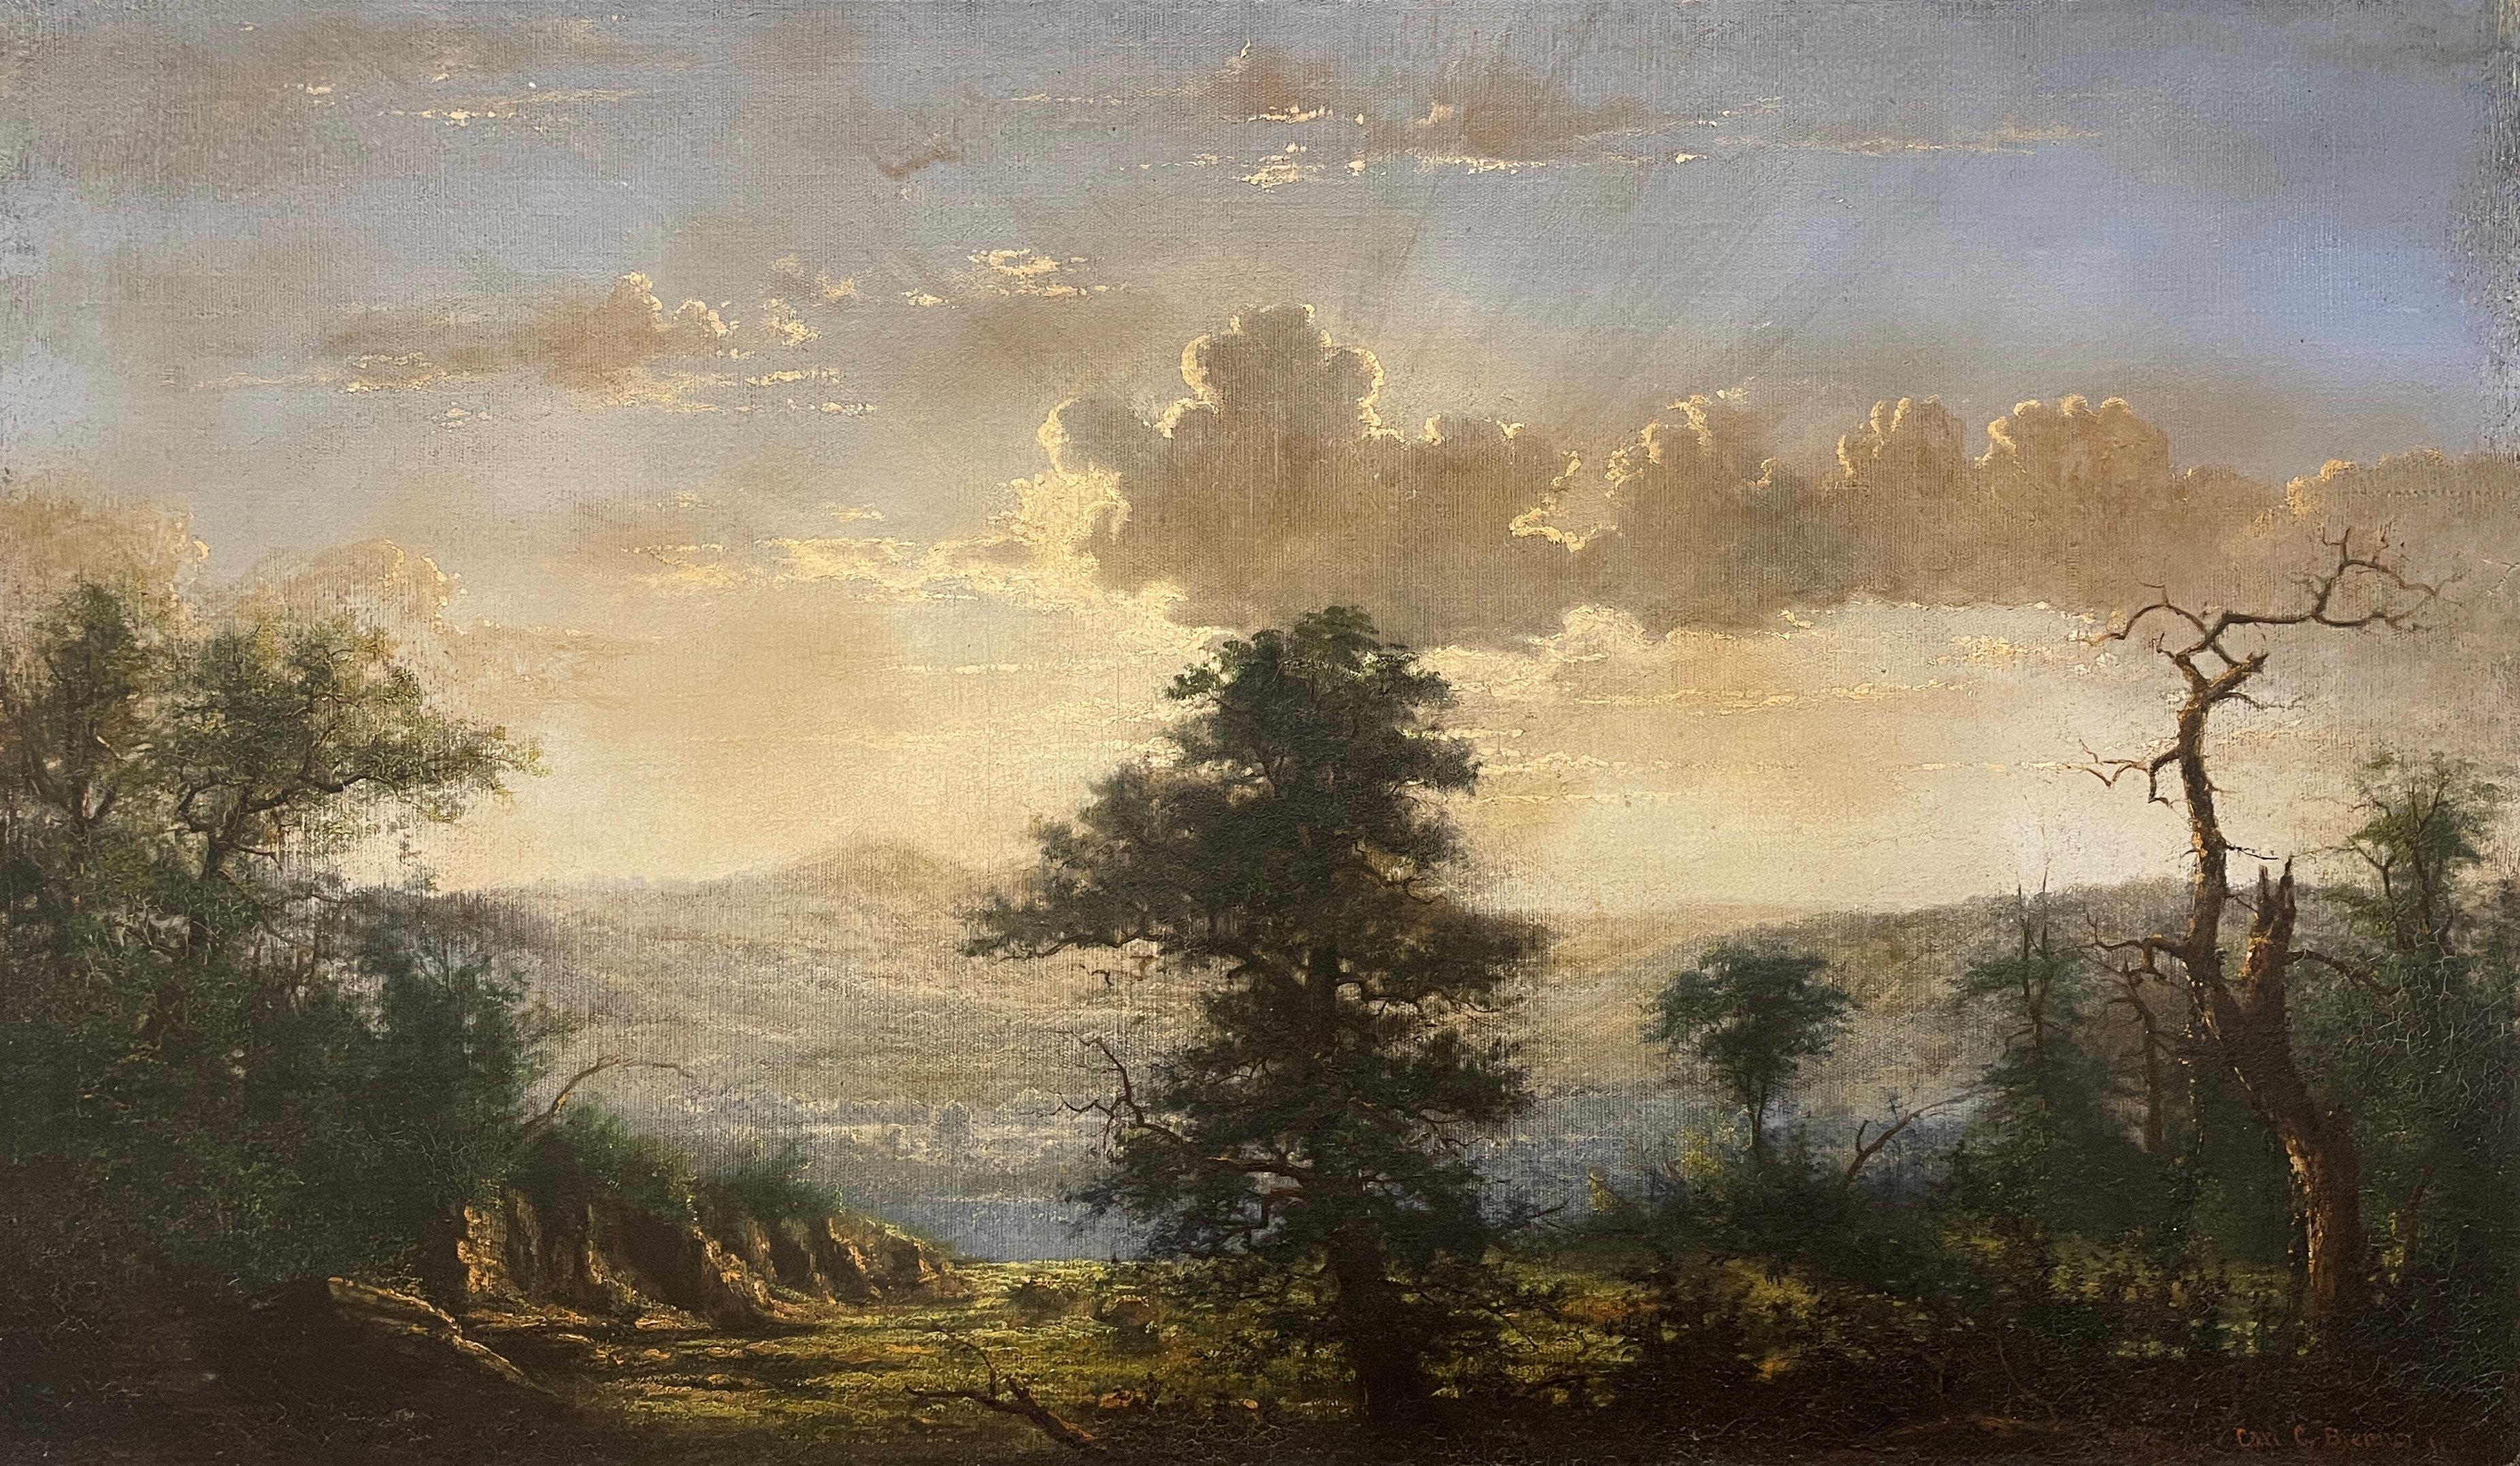 Landscape Painting Carl Christian Brenner - "Breaking Through the Clouds, Kentucky" Carl Brenner, paysage de l'Appalachia